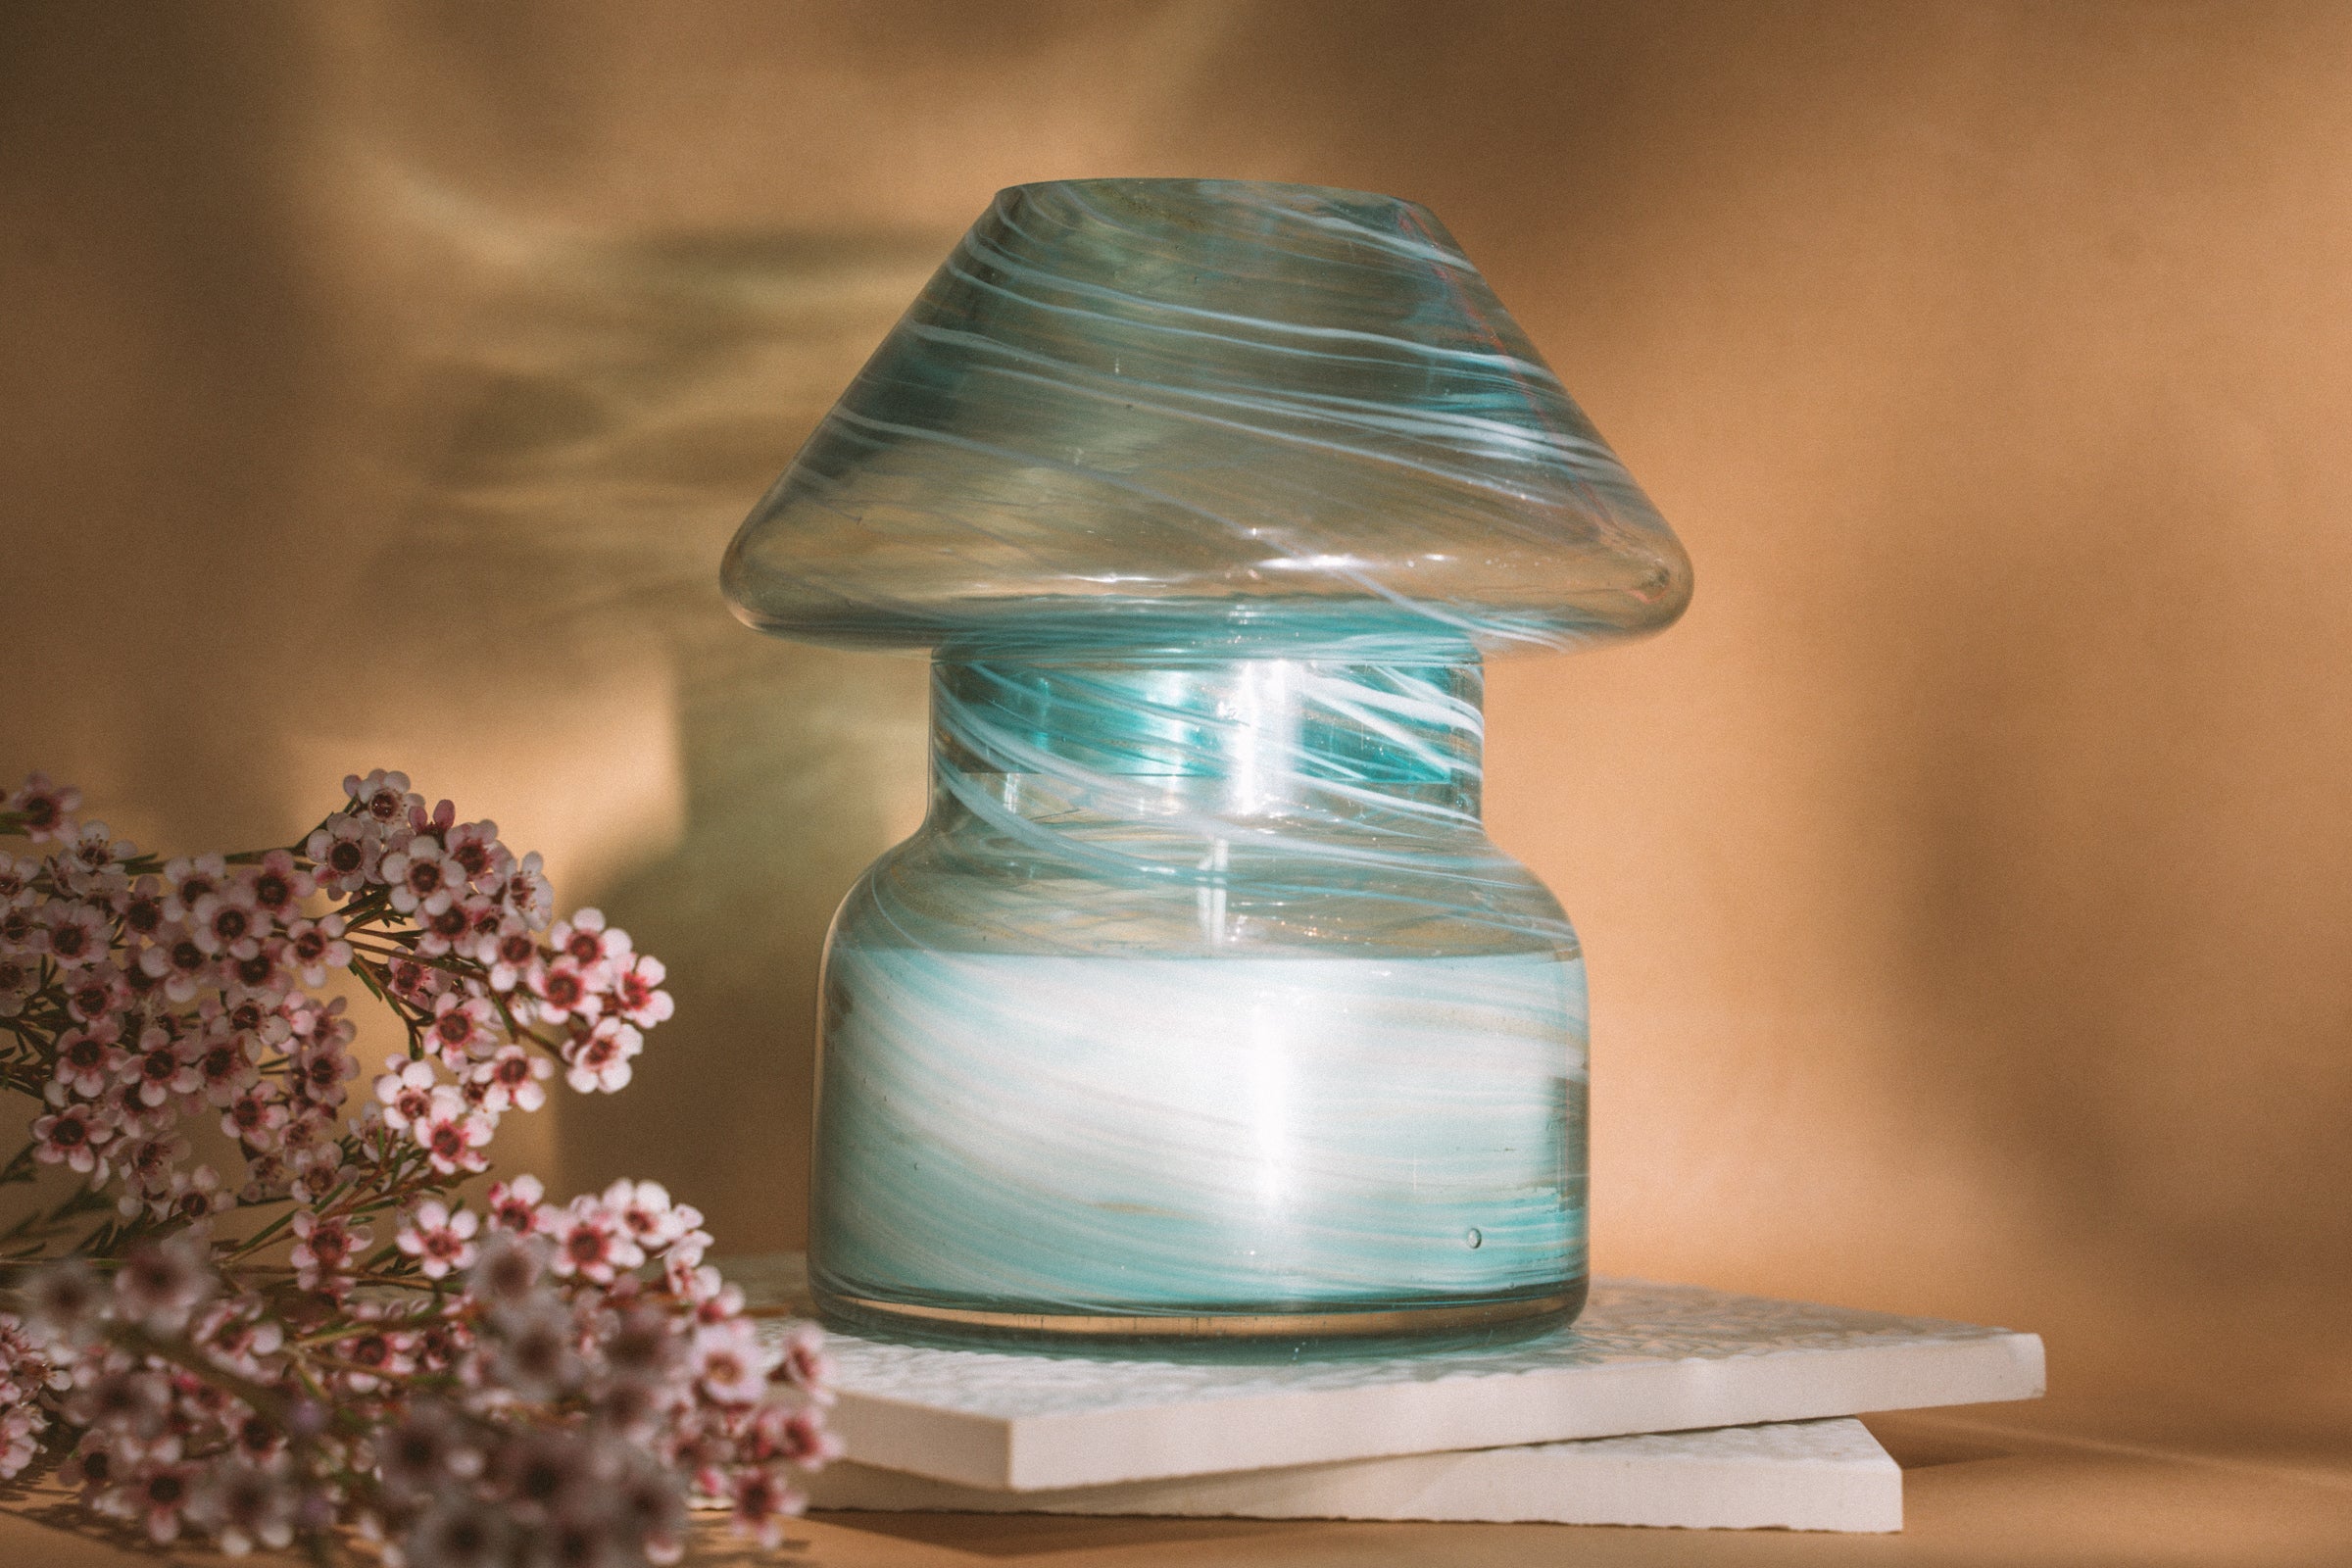 Mushroom candle lamp with aqua blue and gold glitter swirls on clear glass. Mushroom lamp is filled with 100% soy wax placed on white tiles and tan background.